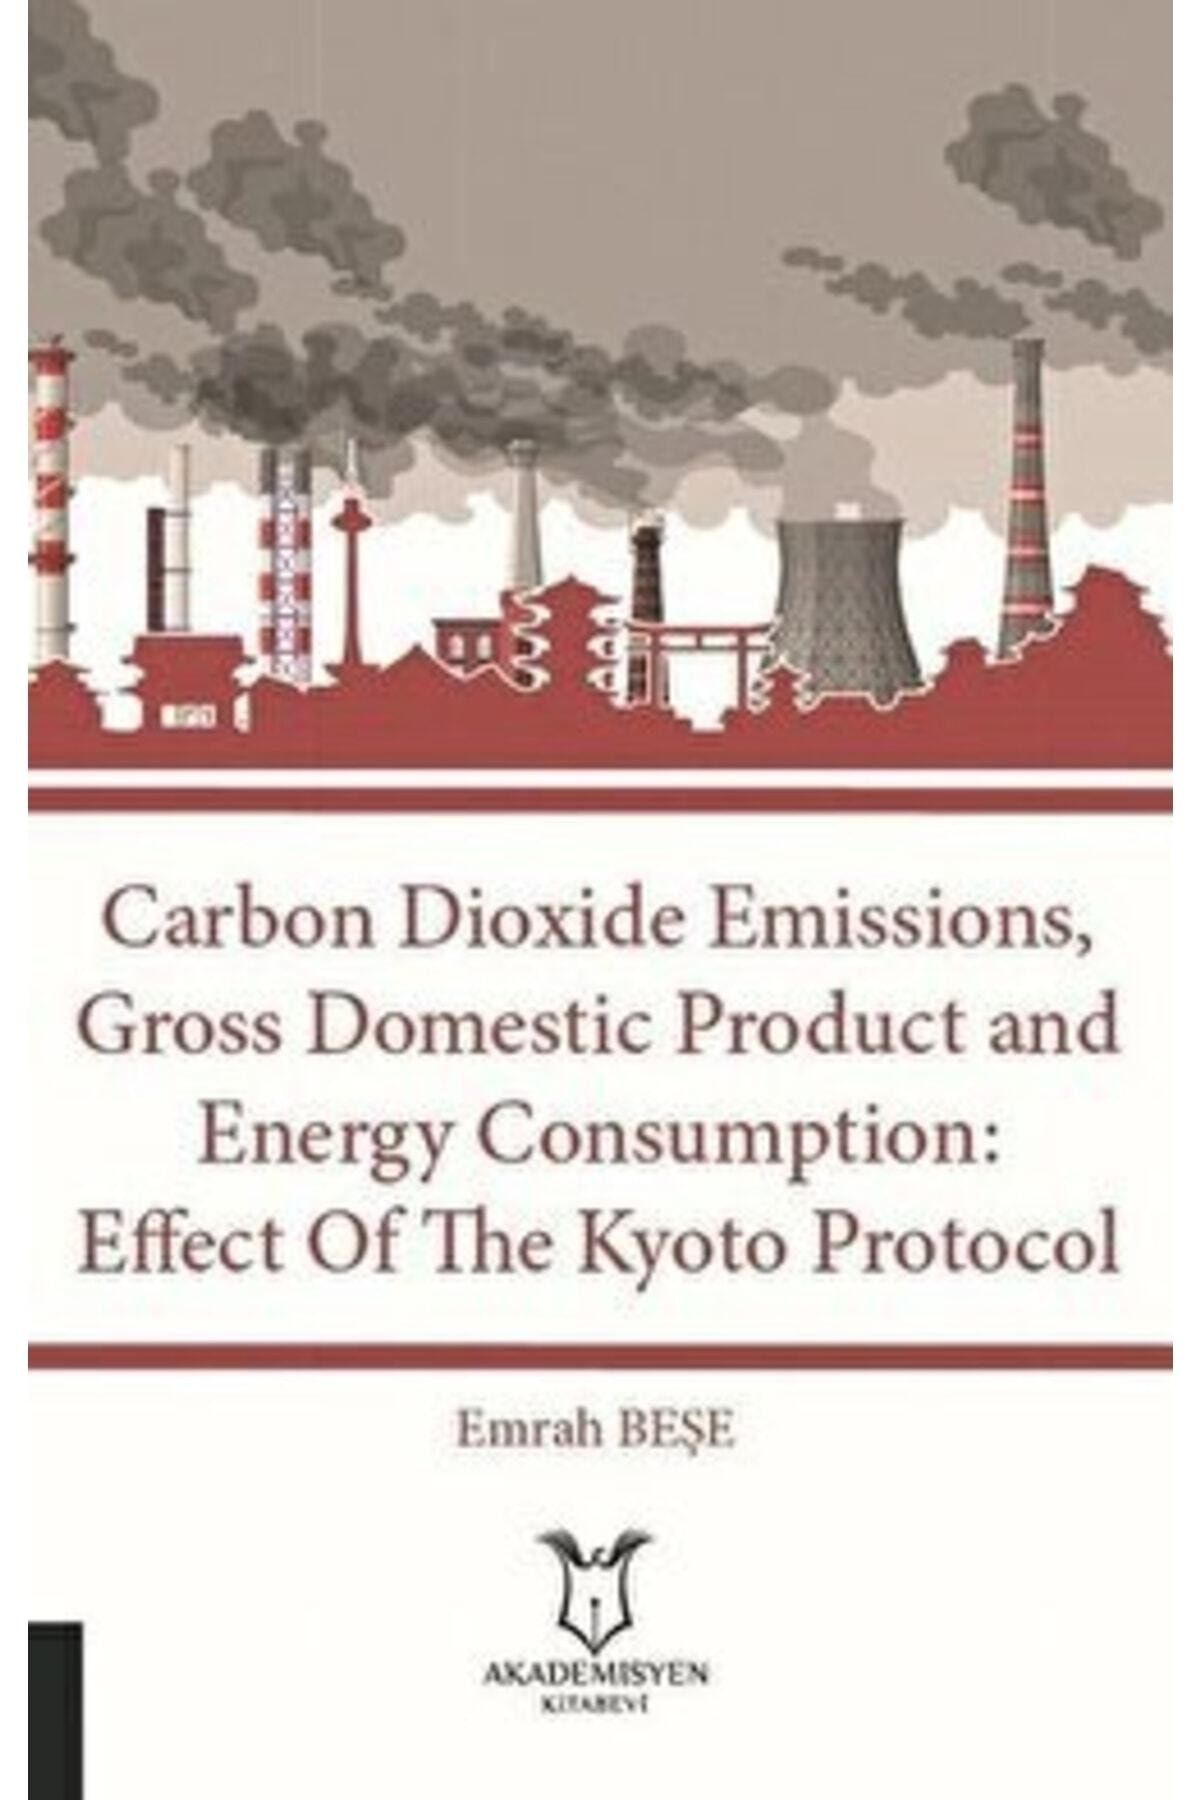 Akademisyen Kitabevi Carbon Dioxide Emissions, Gross Domestic Product And Energy Consumption: Effect Of The Kyoto Prot...